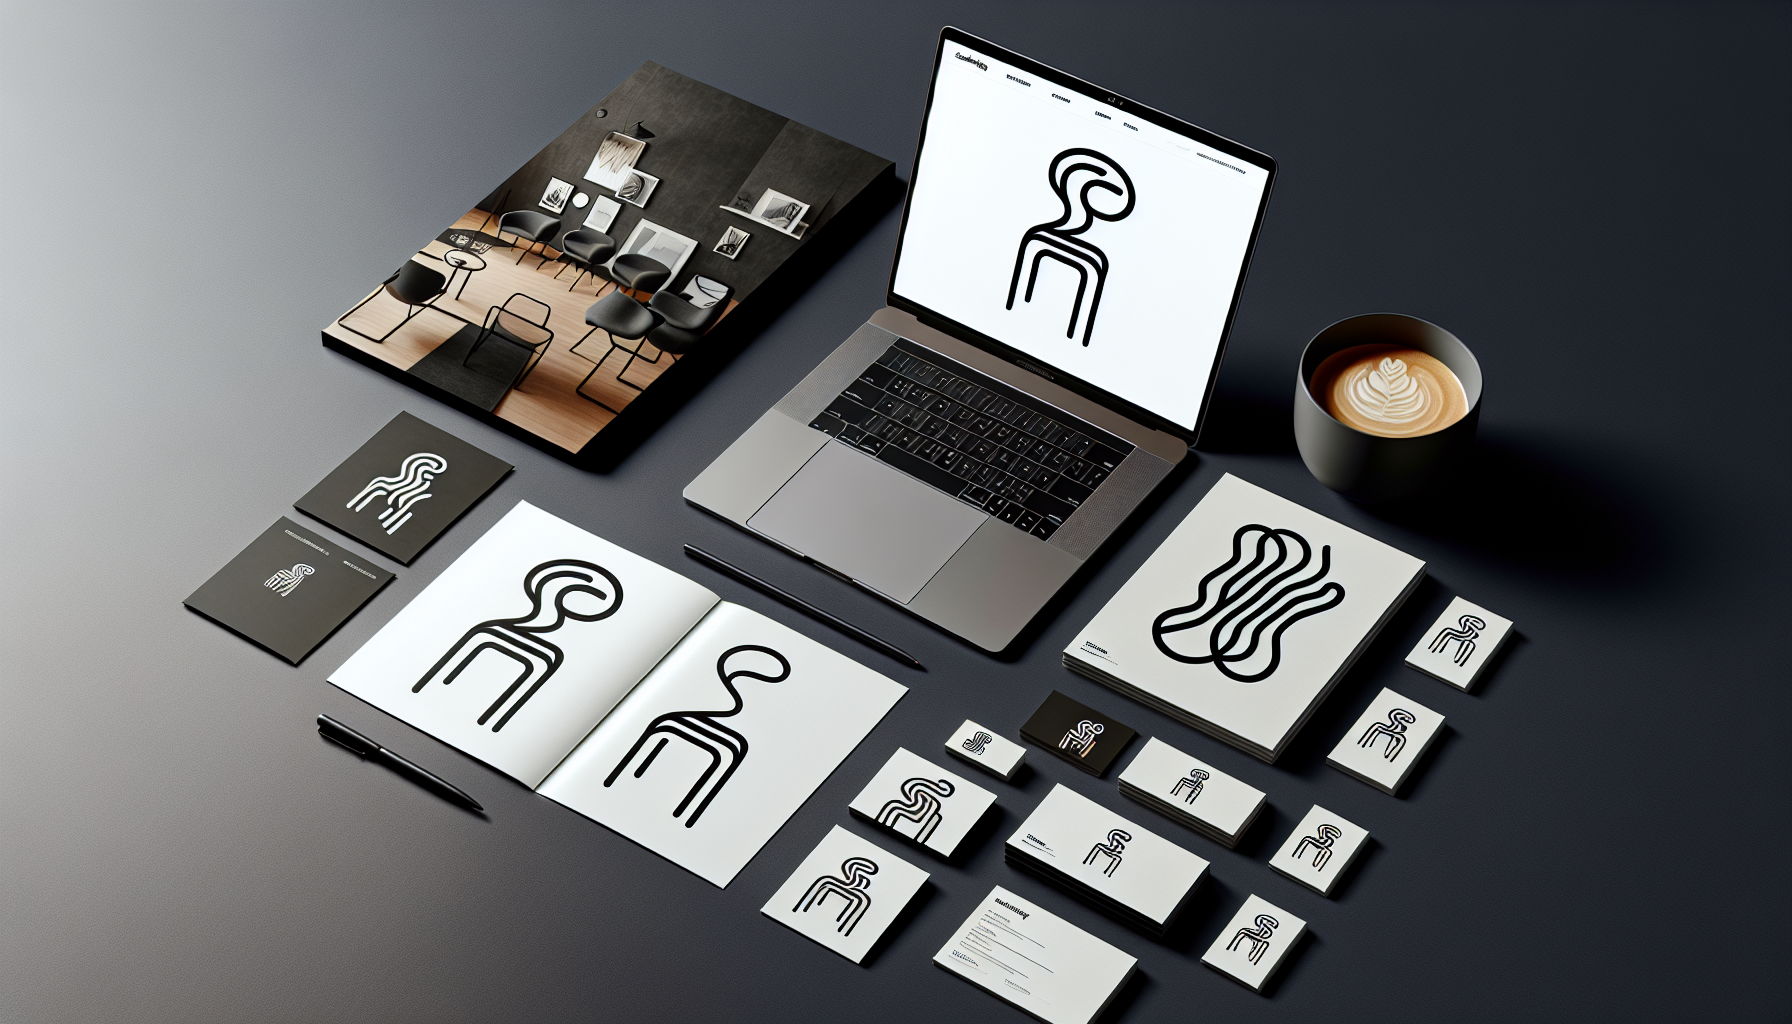 Branding identity materials such as logo, business cards, and website design